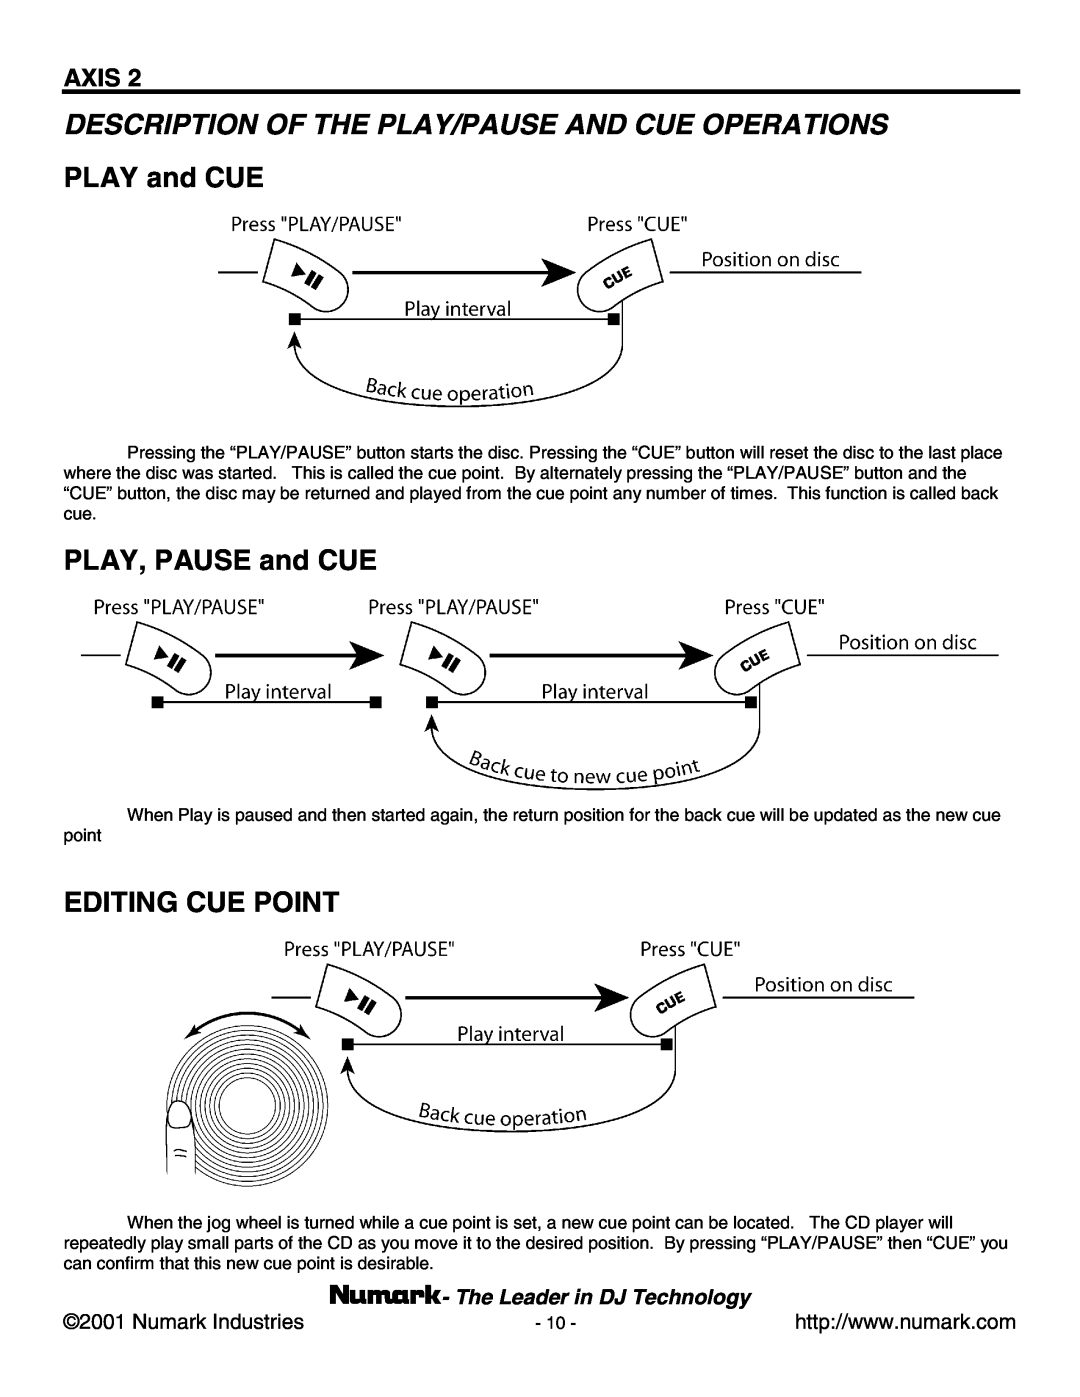 Numark Industries AXIS 9 manual Description Of The Play/Pause And Cue Operations, PLAY and CUE, PLAY, PAUSE and CUE, Axis 